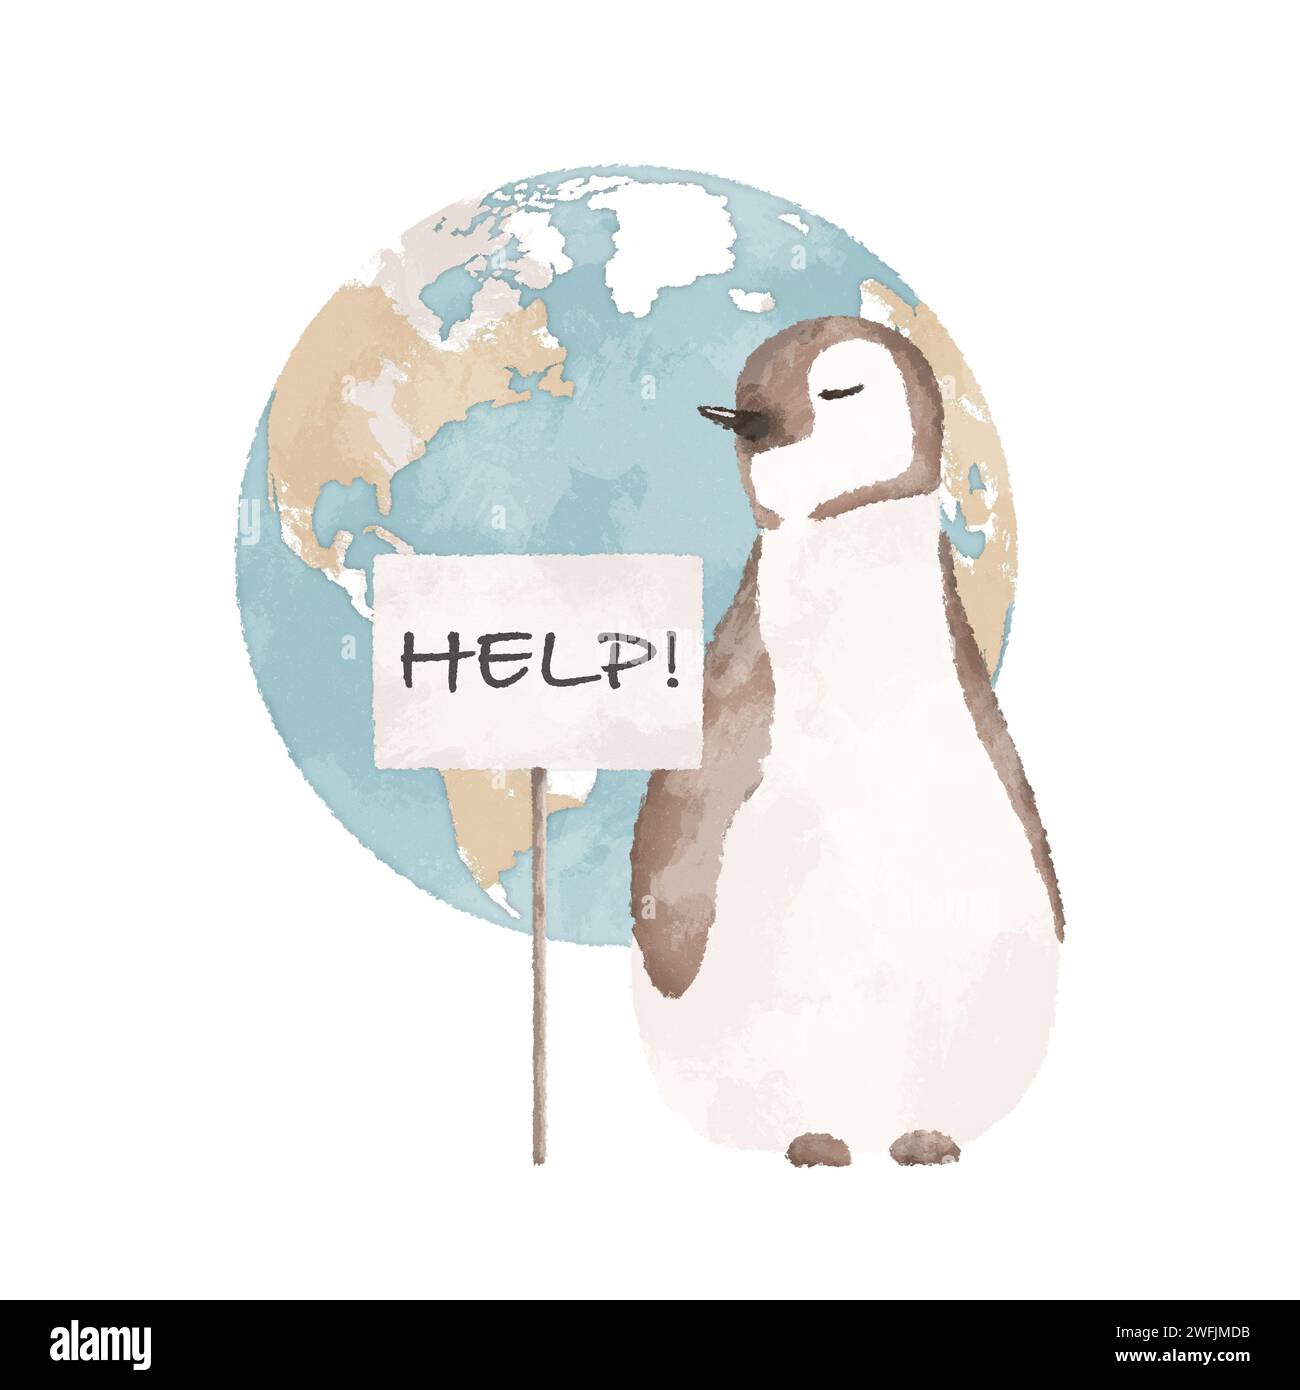 Penguin with a help sign and planet Earth illustration. Global warming concept. Climate change concept illustration. Stock Photo